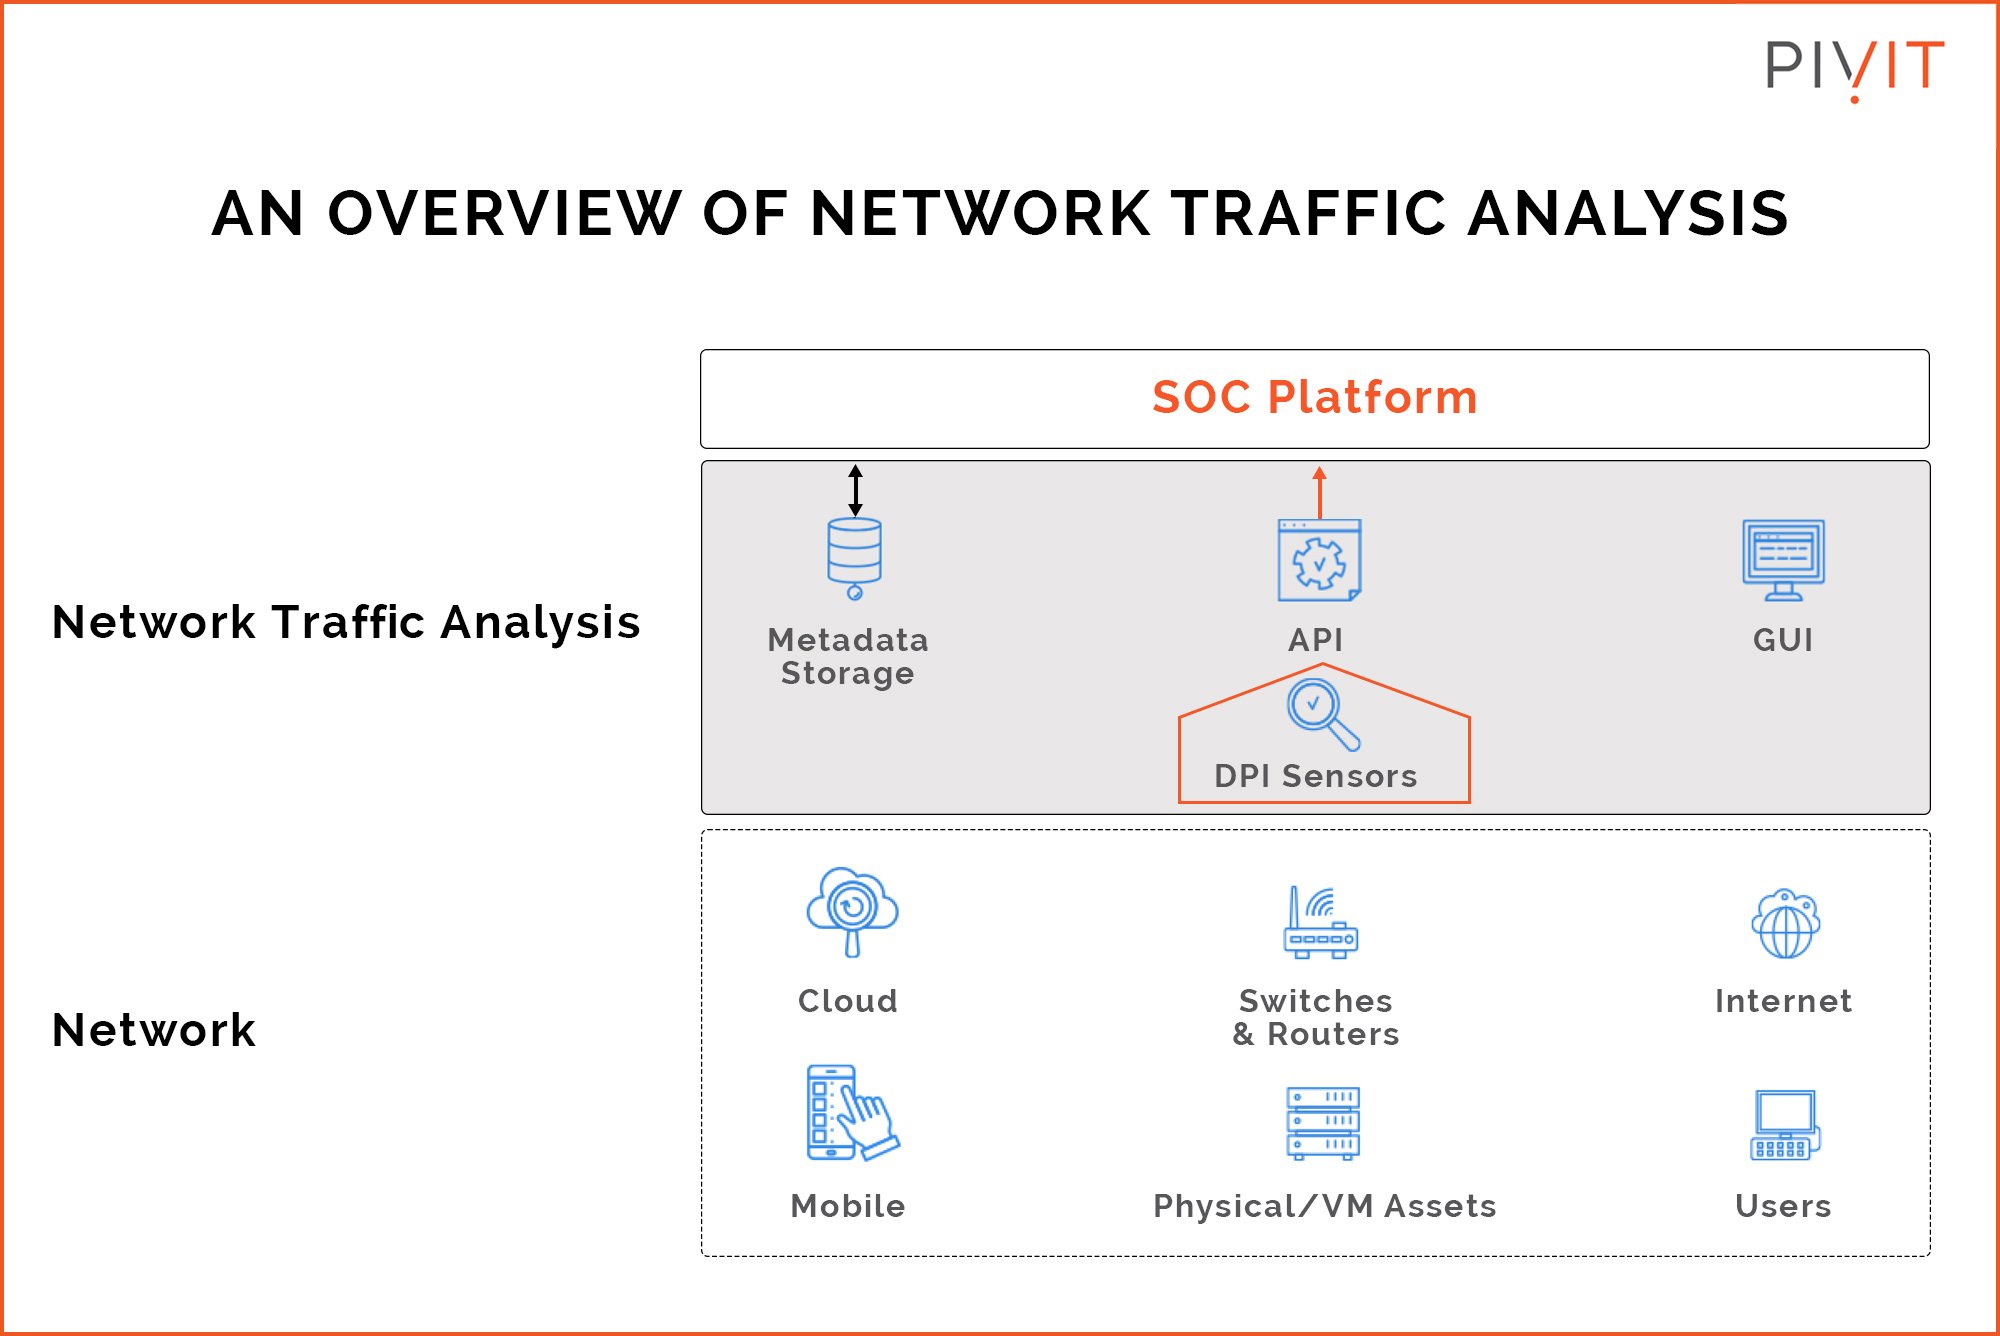 An infographic showing an overview of network traffic analysis, including a SOC platform with metadata storage, API, GUI, and DPI sensors. The network includes components such as the cloud, switches and routers, internet, mobile devices, physical/VM assets, and users.